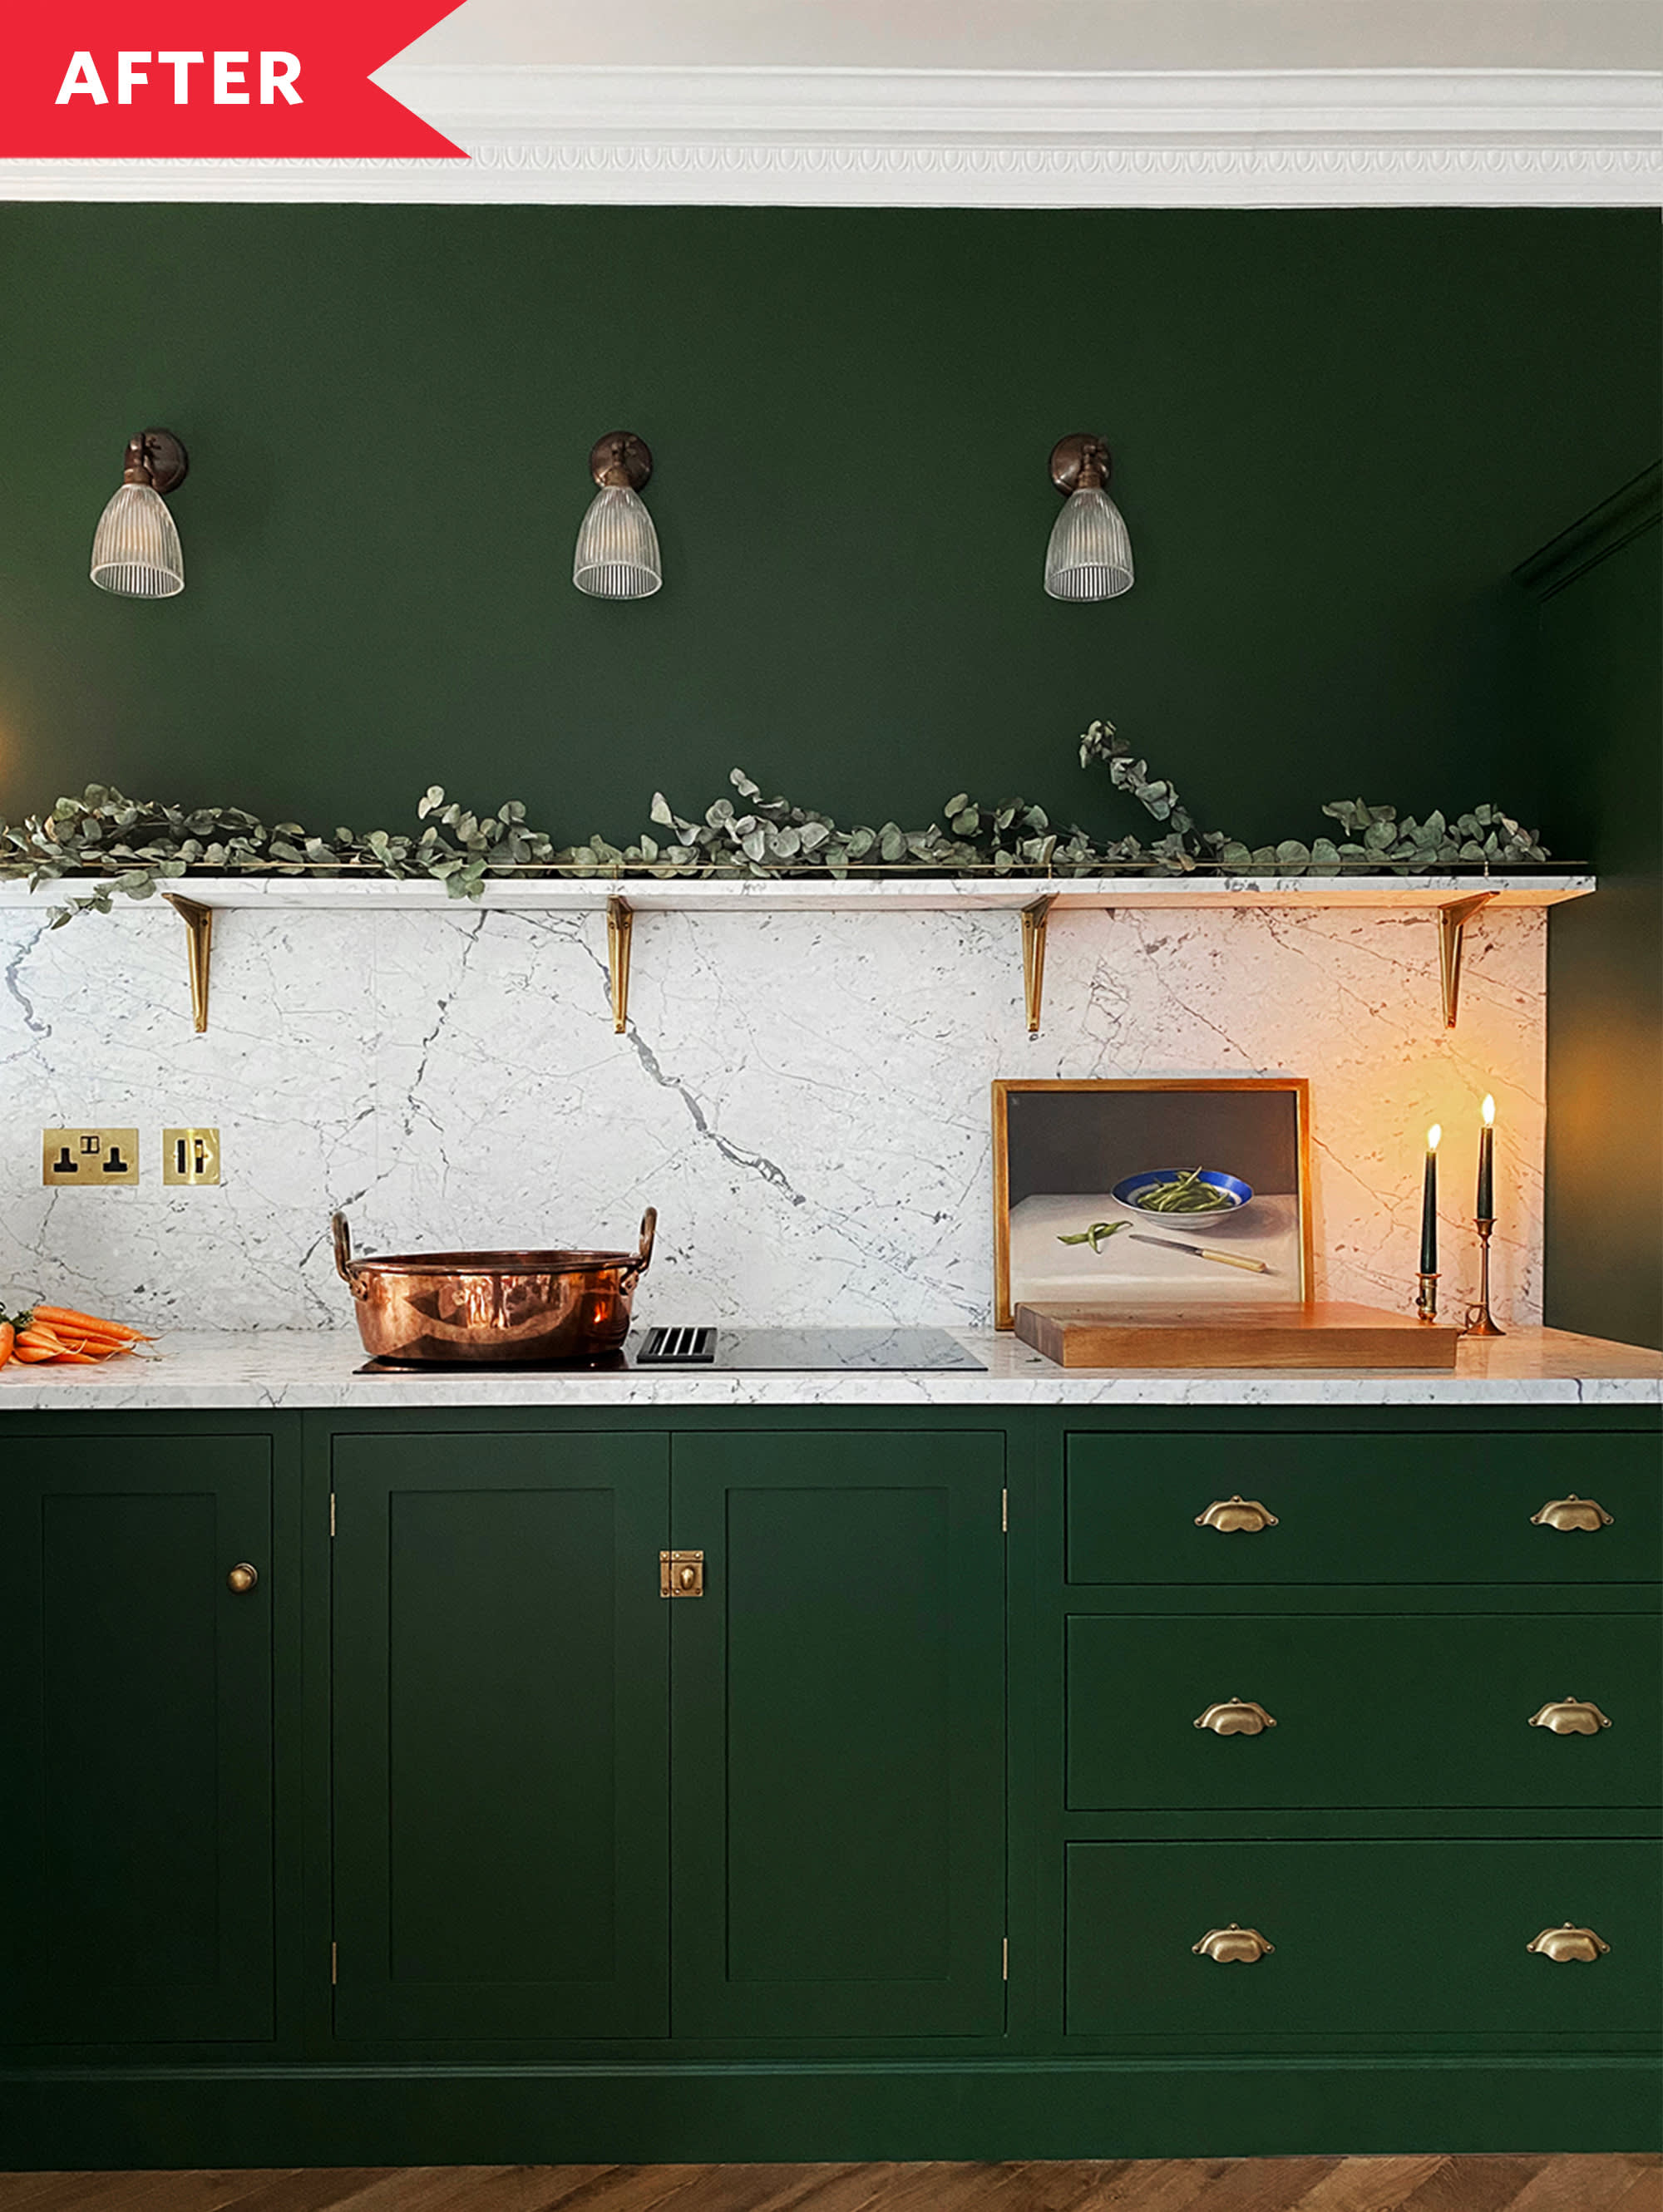 Before & After A Small Cook Space Gets a Bold Glow Up from deVOL ...